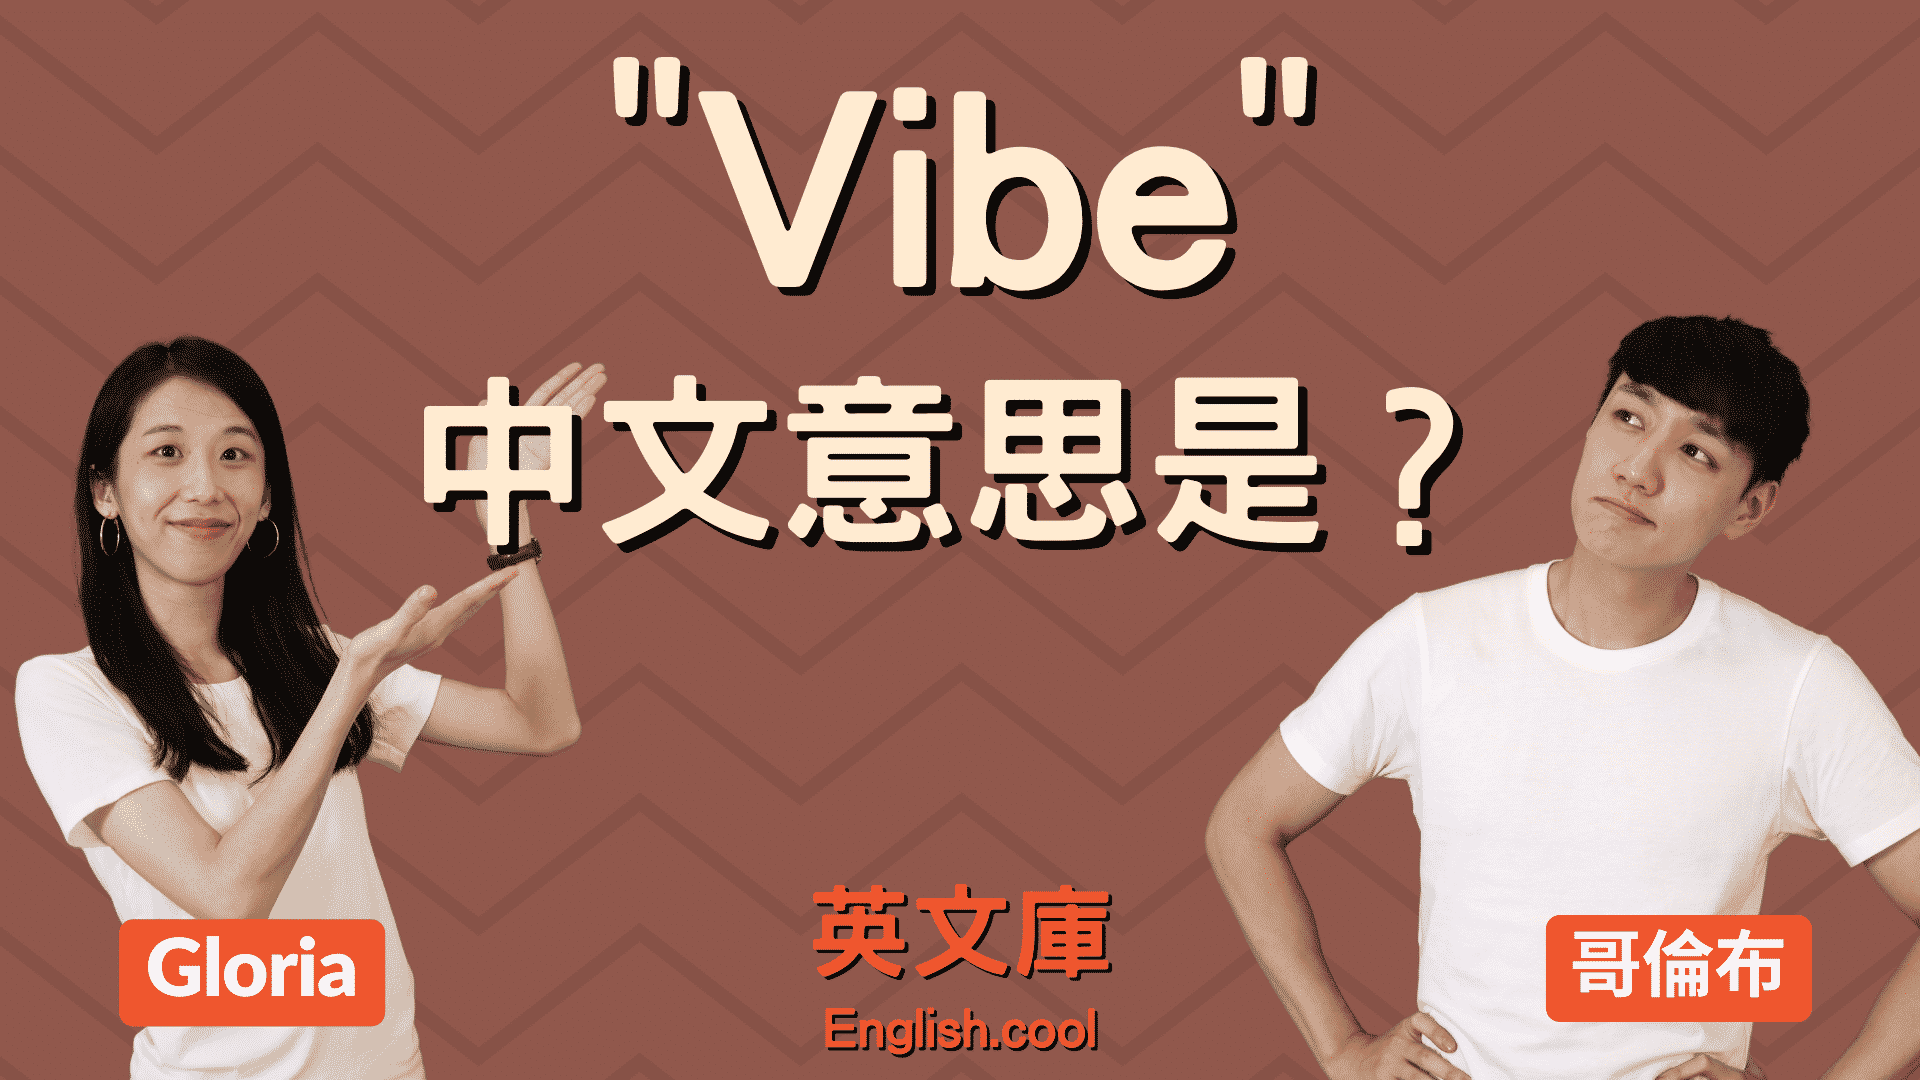 You are currently viewing 「vibe」中文意思是？來一次搞懂 good vibes, BDKMV 等!（含例句）